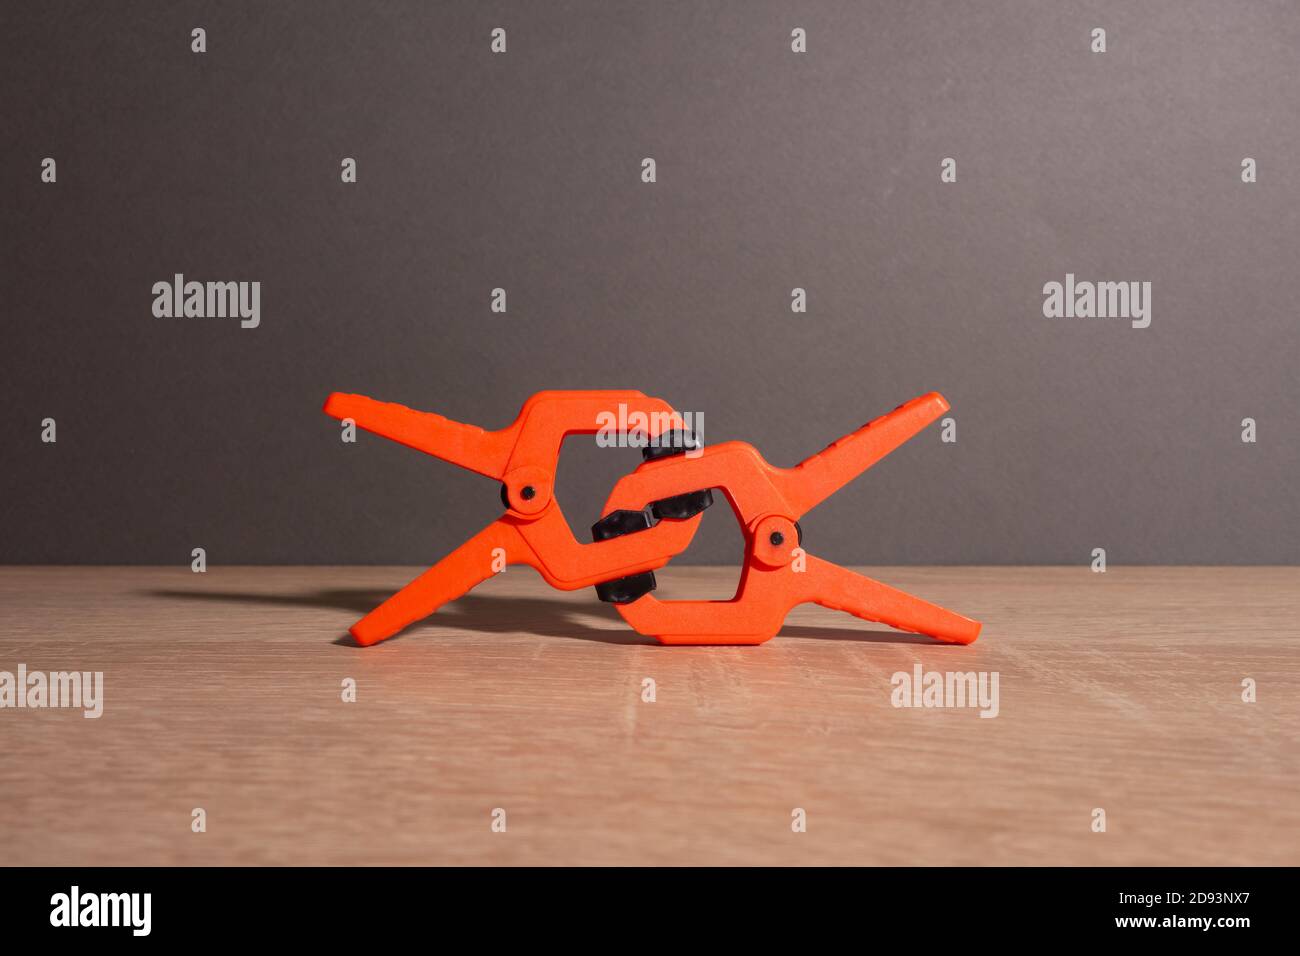 Clothespins, carpentry clamps of orange color lie on a wooden table. A pyramid in the form of a robot made of clamps. Stock Photo